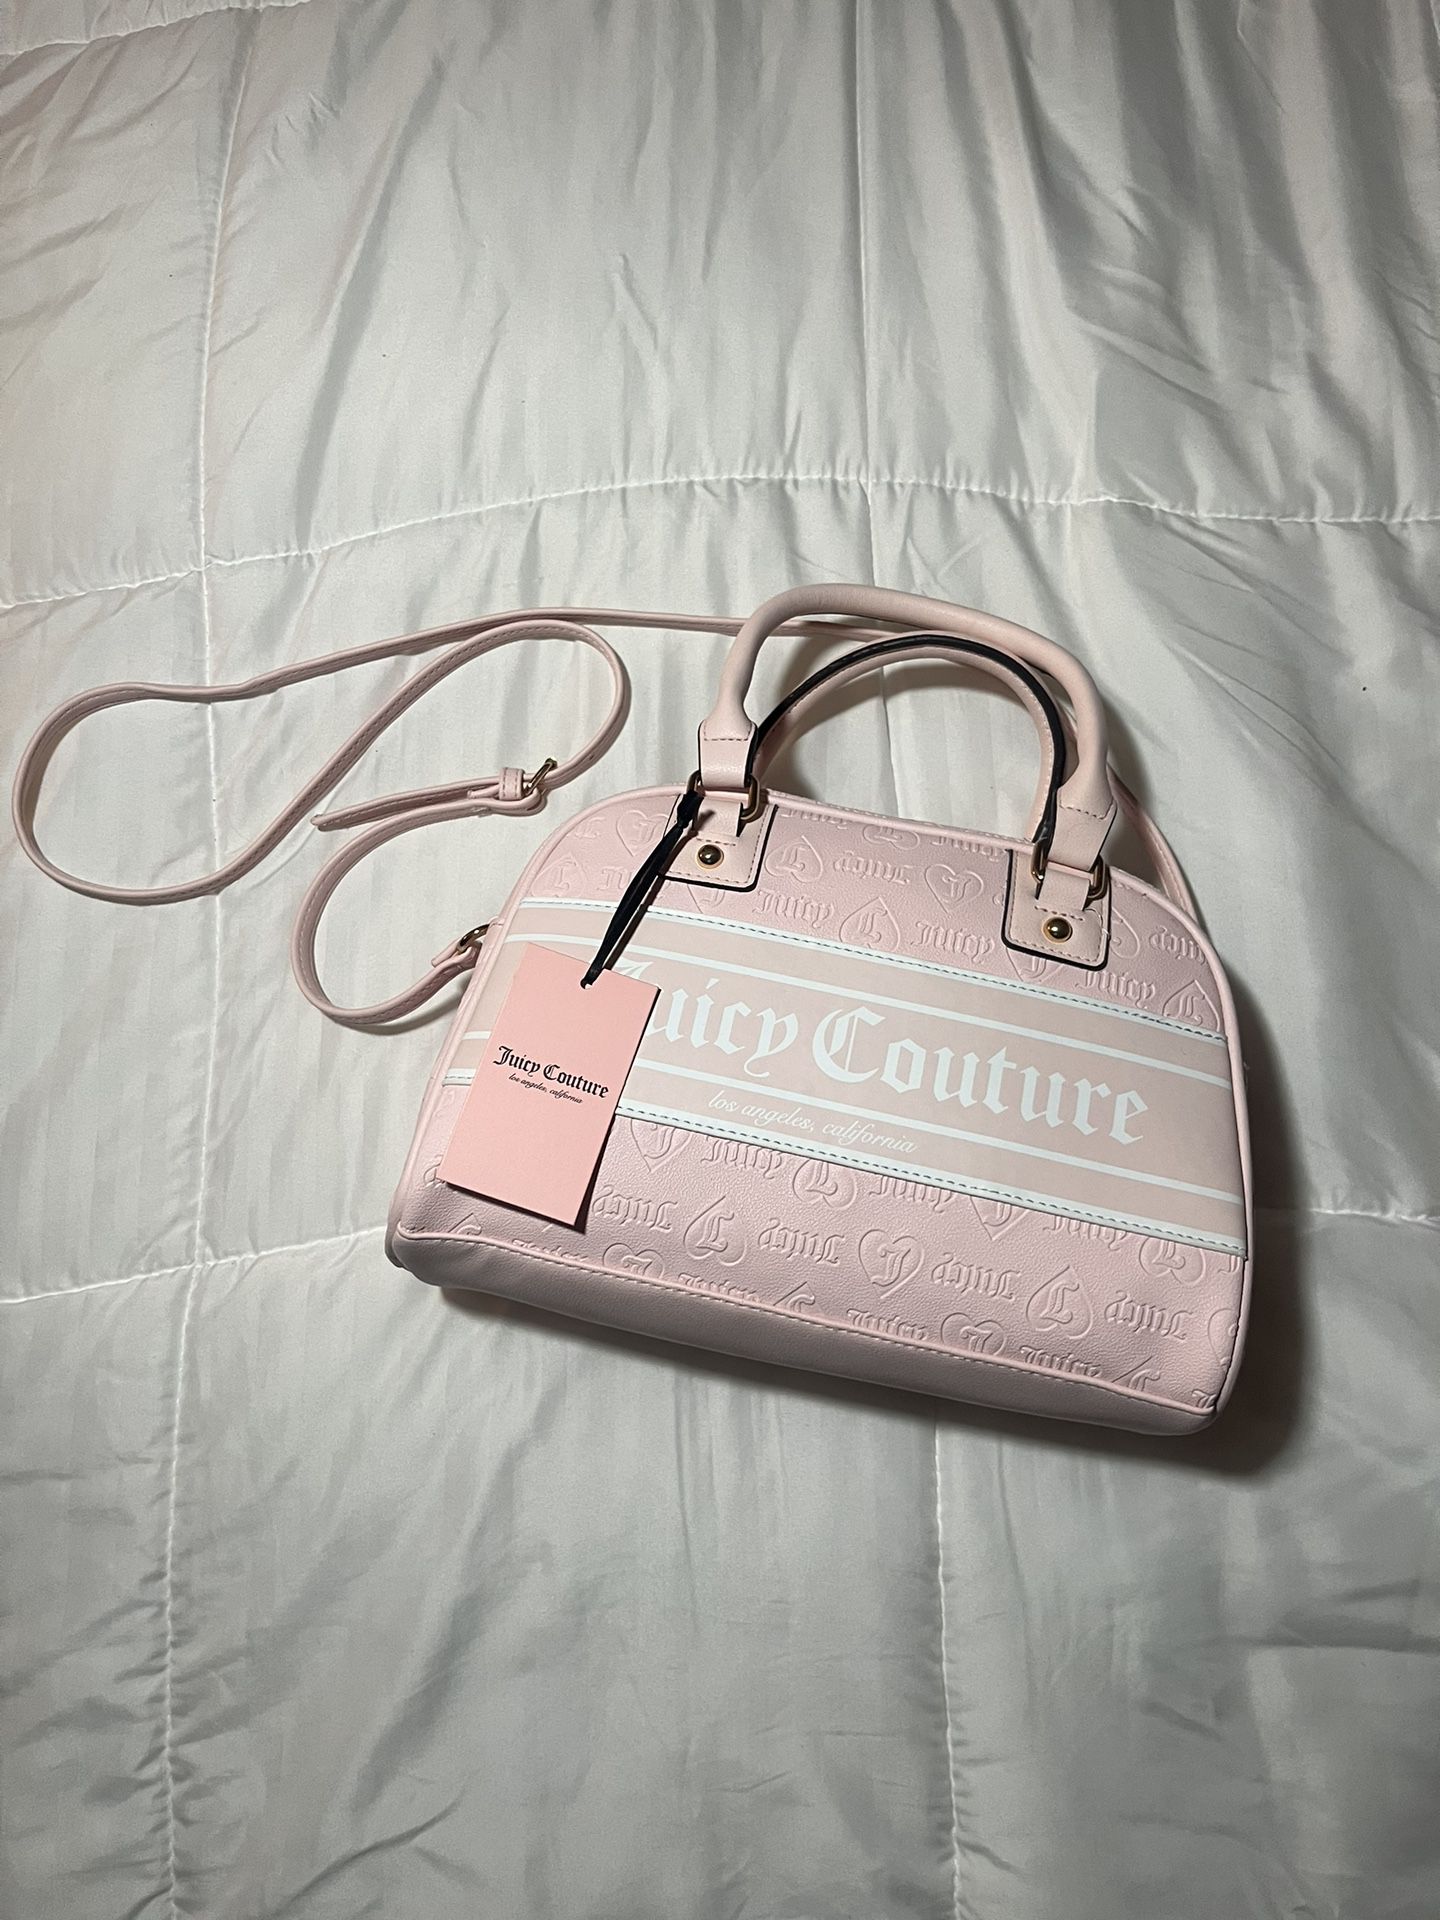 Juicy Couture Pink Purse